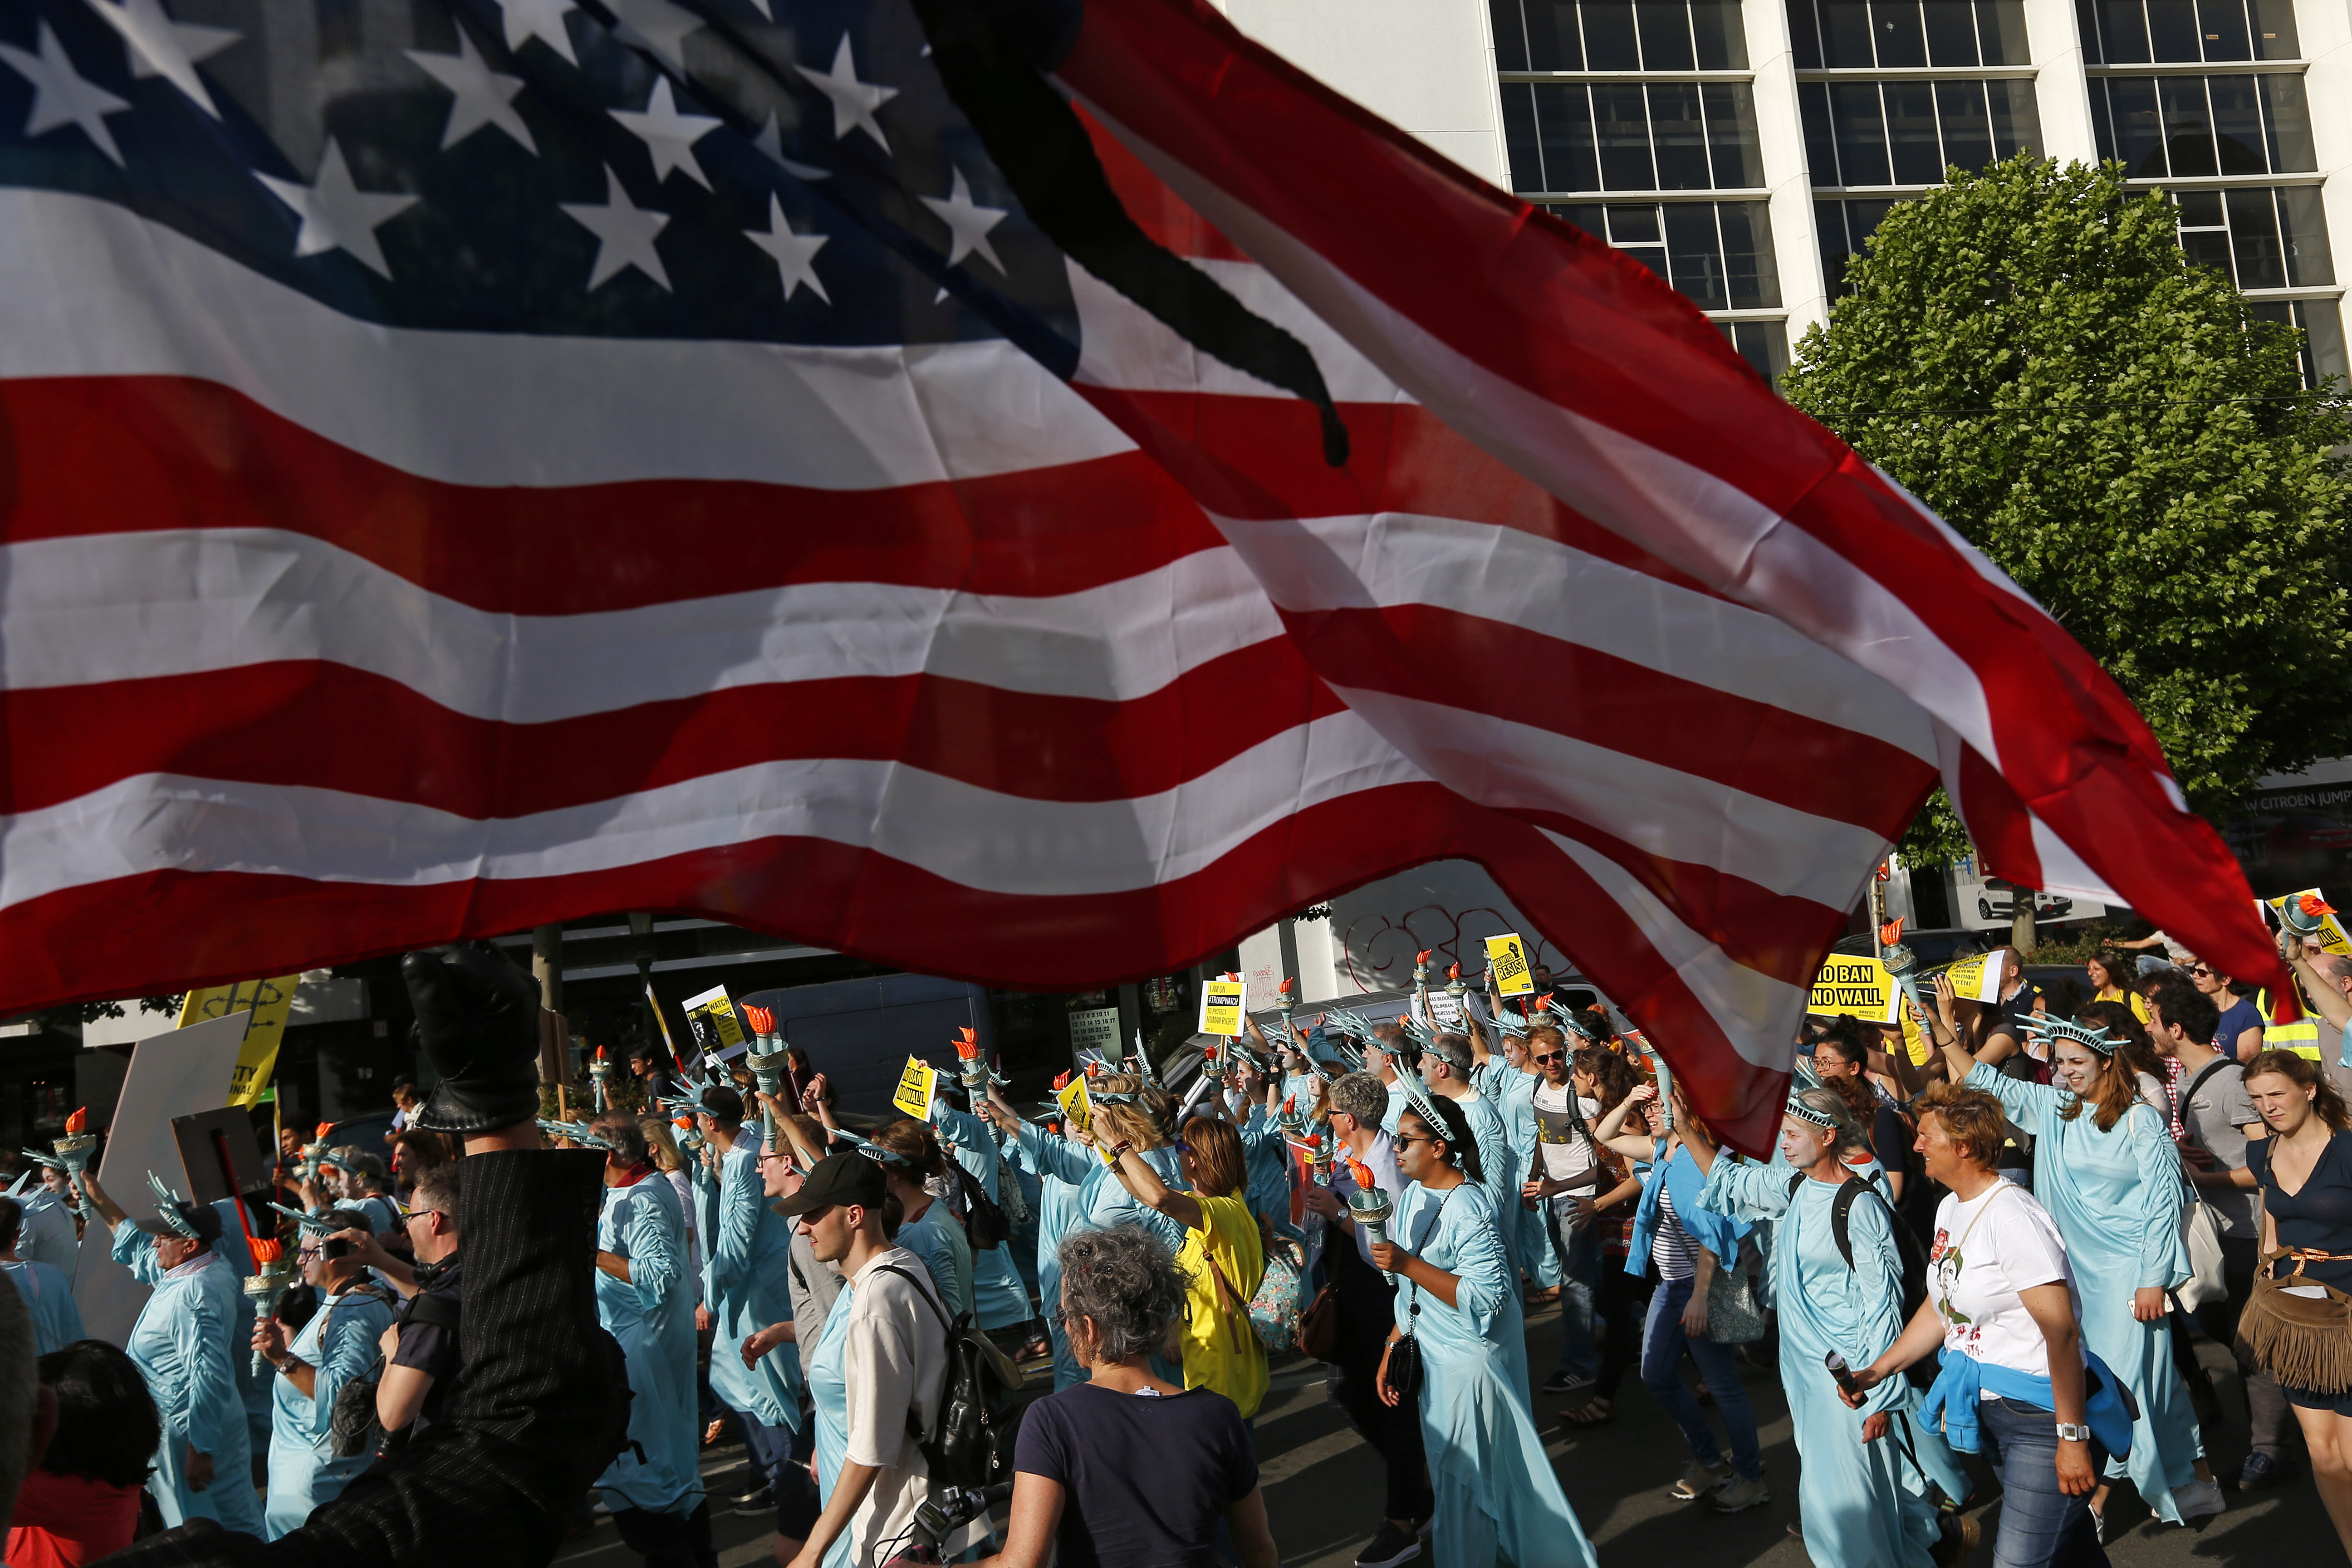 Protesters dressed as the Statue of Liberty march under a US flag during a demonstration in the center of Brussels on Wednesday, May 24, 2017. Demonstrators marched in Brussels ahead of a visit of US President Donald Trump and a NATO heads of state summit which will take place on Thursday. (AP Photo/Peter Dejong)